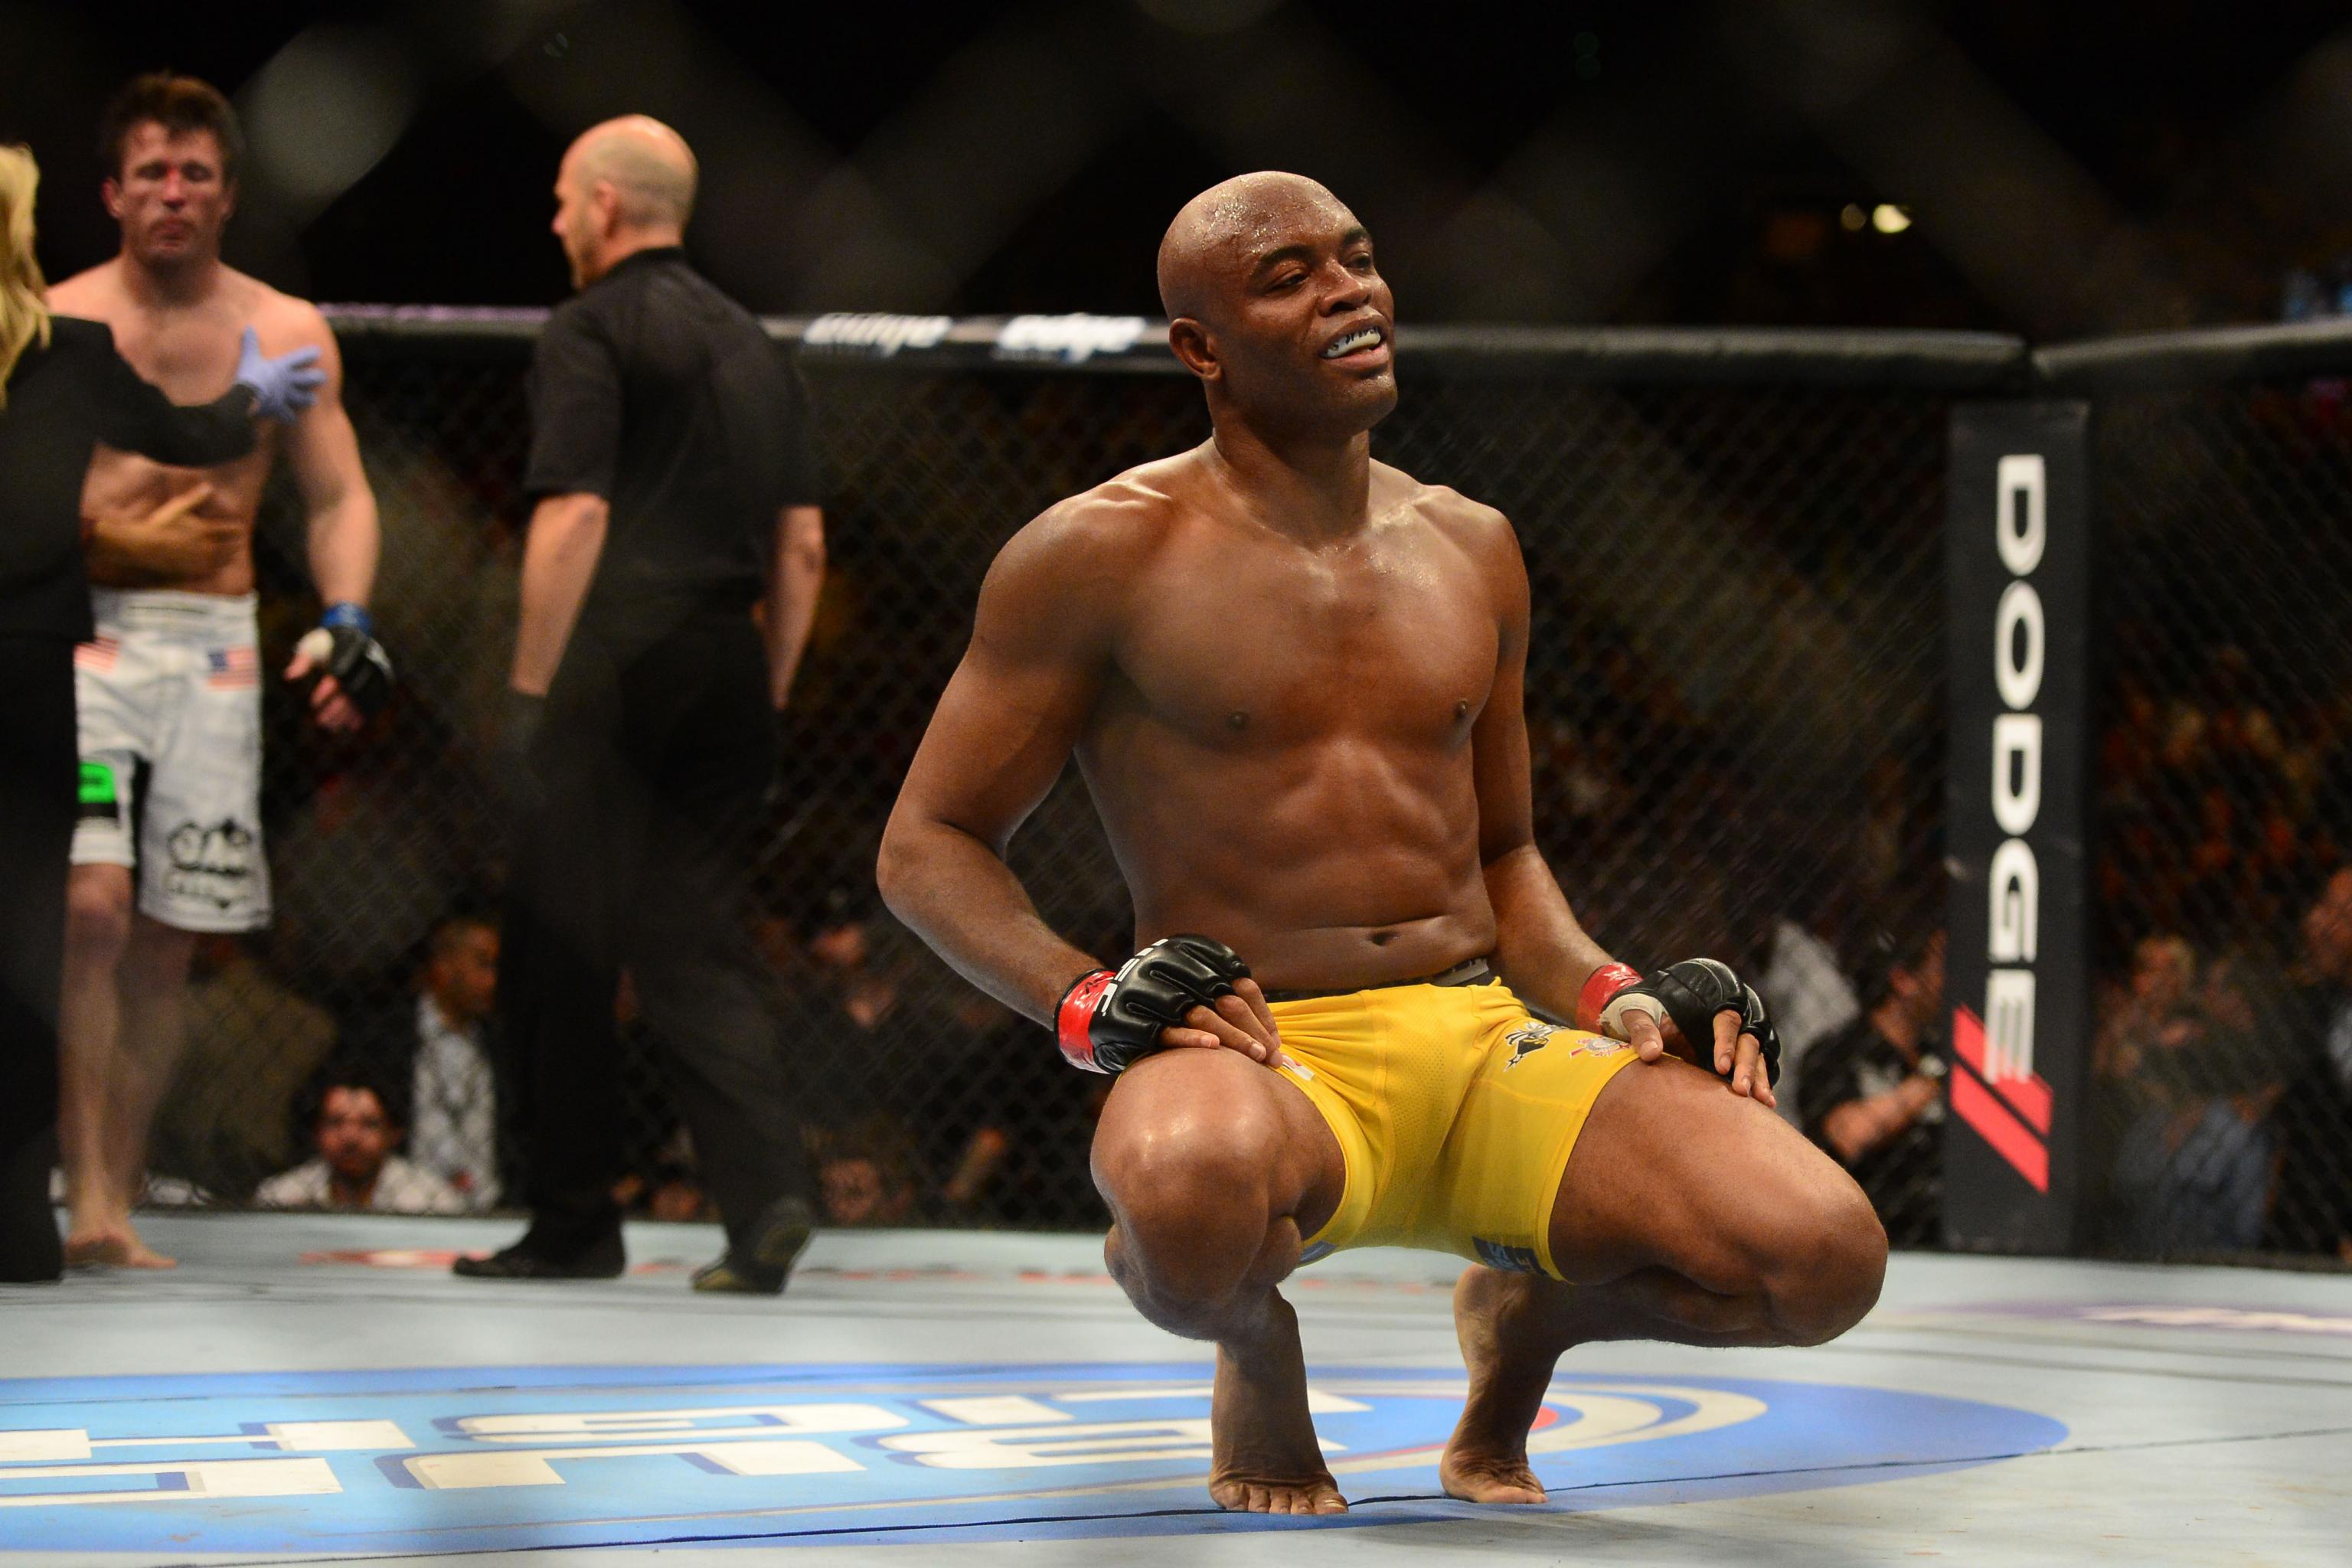 Mma Fighters Who Started Late